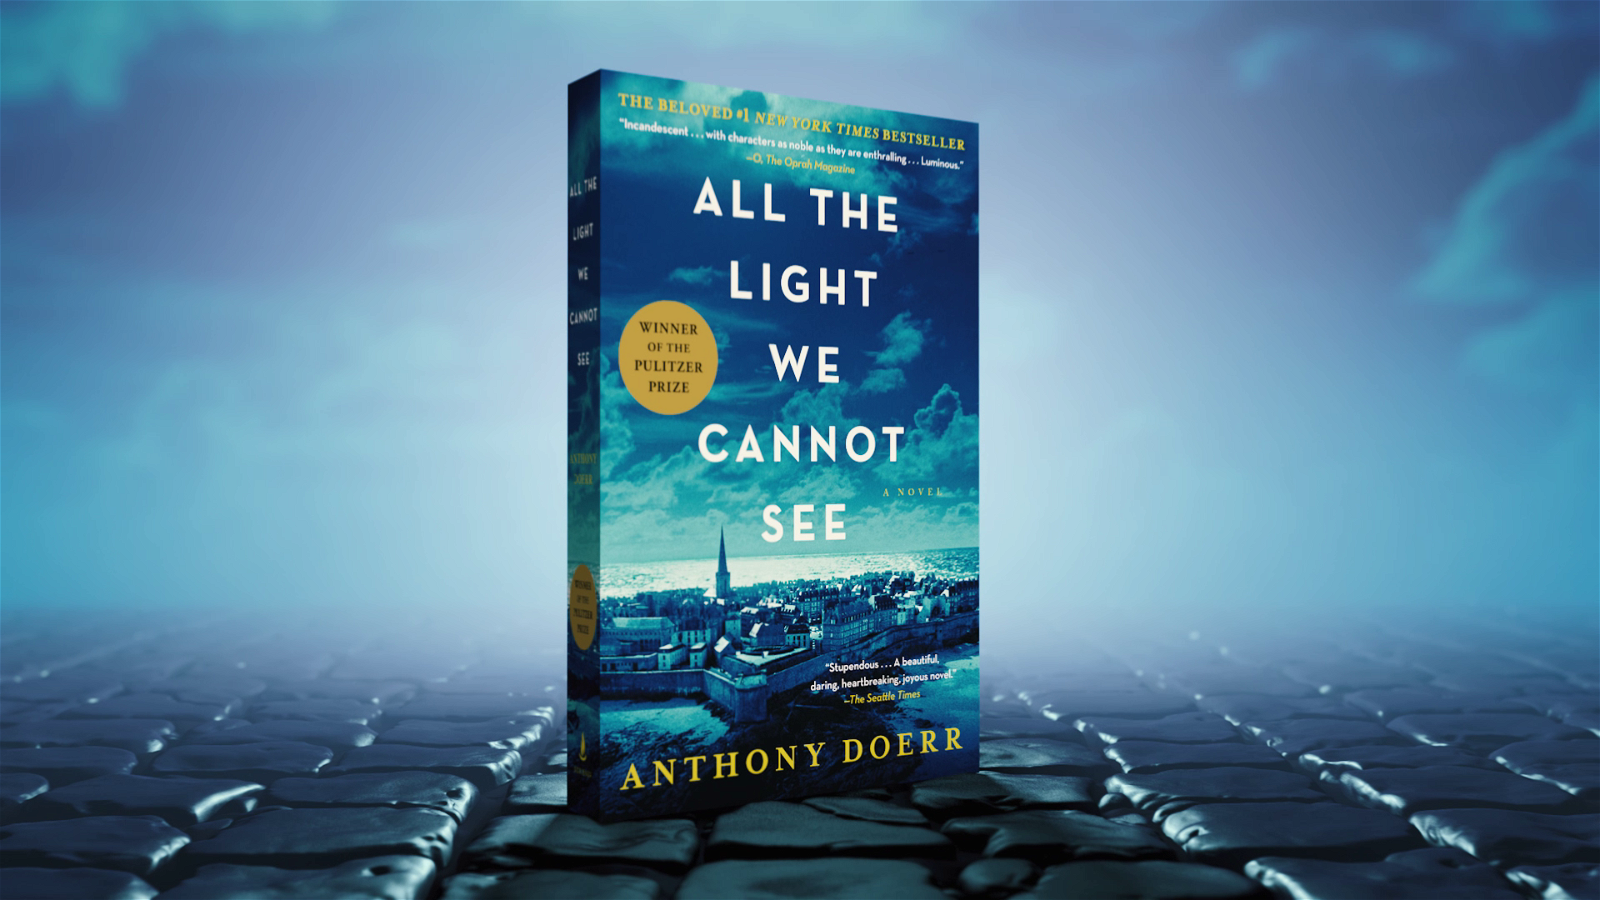 All the Light We Cannot See: Everything We Know About the Netflix Series